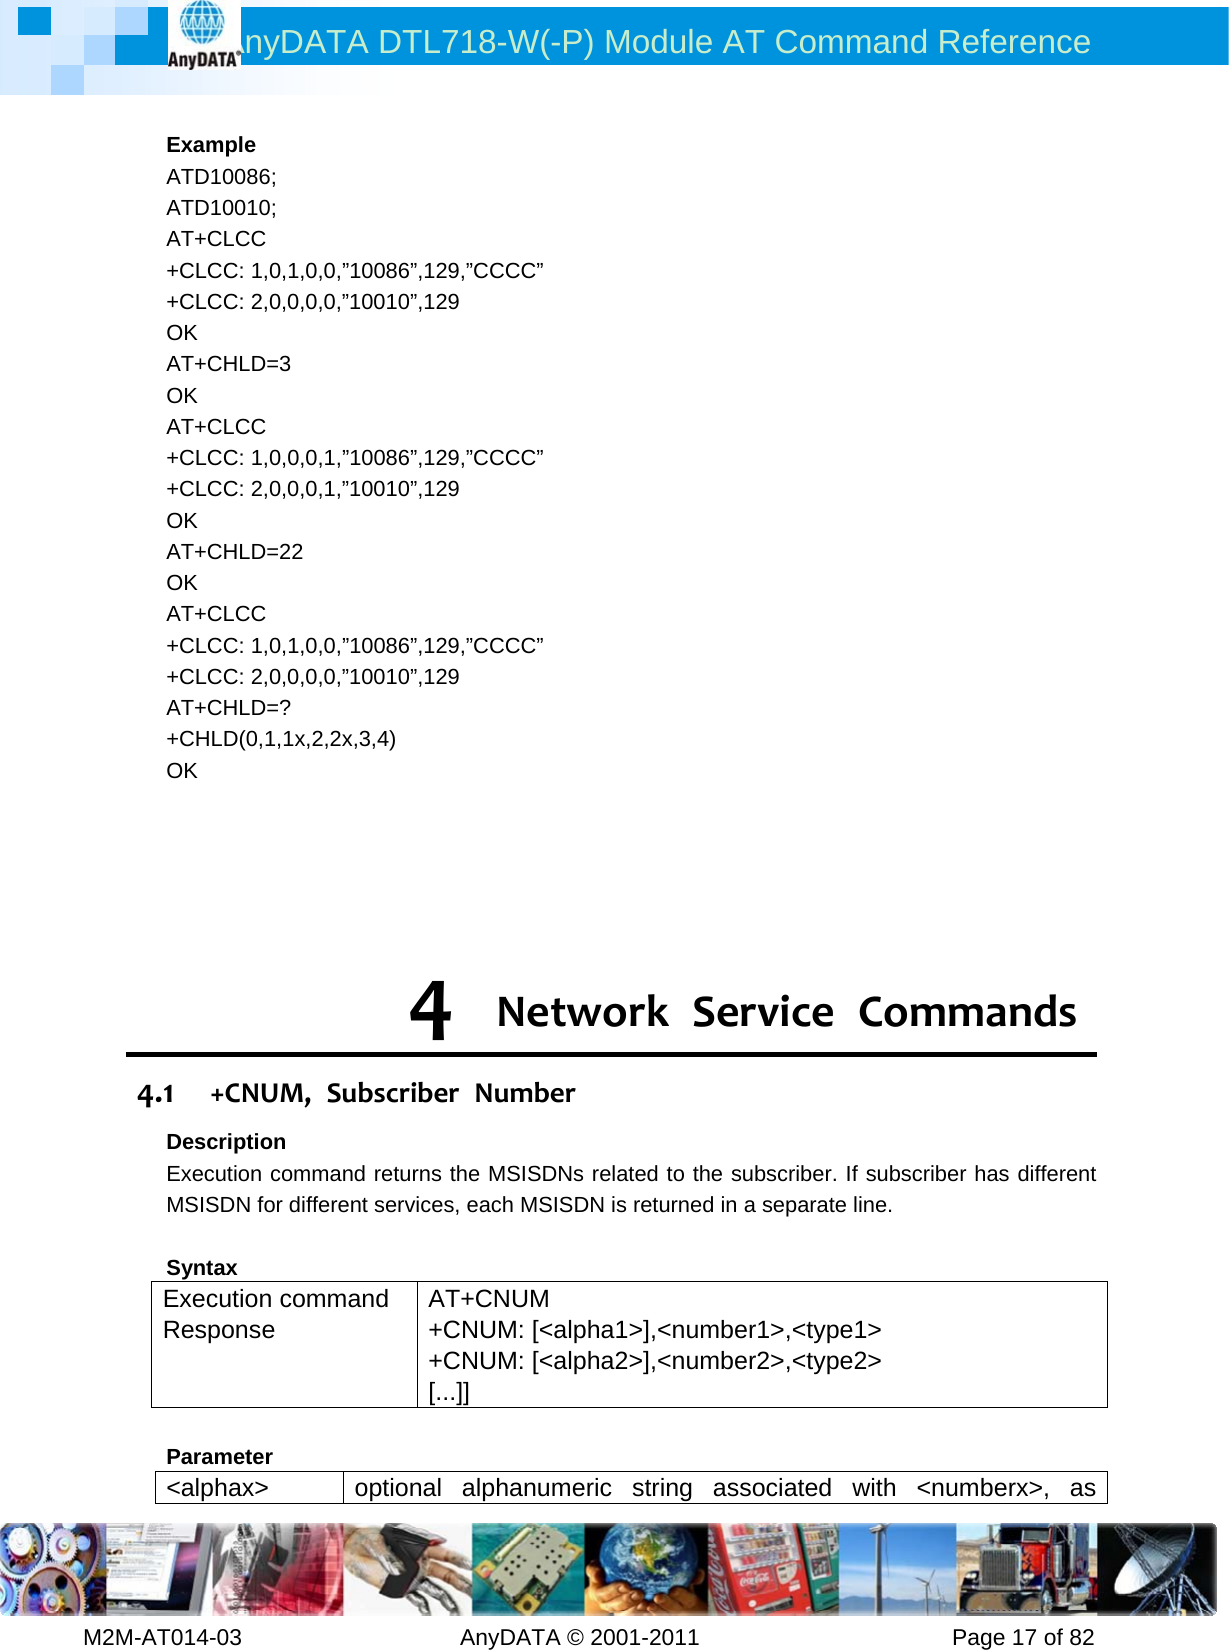 AnyDATA DTL718-W(-P) Module AT Command Reference         M2M-AT014-03                   AnyDATA © 2001-2011                      Page 17 of 82  Example ATD10086; ATD10010; AT+CLCC +CLCC: 1,0,1,0,0,”10086”,129,”CCCC” +CLCC: 2,0,0,0,0,”10010”,129 OK AT+CHLD=3 OK AT+CLCC +CLCC: 1,0,0,0,1,”10086”,129,”CCCC” +CLCC: 2,0,0,0,1,”10010”,129 OK AT+CHLD=22 OK AT+CLCC +CLCC: 1,0,1,0,0,”10086”,129,”CCCC” +CLCC: 2,0,0,0,0,”10010”,129 AT+CHLD=? +CHLD(0,1,1x,2,2x,3,4) OK      4 NetworkServiceCommands4.1 +CNUM,SubscriberNumberDescription Execution command returns the MSISDNs related to the subscriber. If subscriber has different MSISDN for different services, each MSISDN is returned in a separate line.  Syntax Execution command Response AT+CNUM +CNUM: [&lt;alpha1&gt;],&lt;number1&gt;,&lt;type1&gt; +CNUM: [&lt;alpha2&gt;],&lt;number2&gt;,&lt;type2&gt; [...]]  Parameter &lt;alphax&gt; optional alphanumeric string associated with &lt;numberx&gt;, as 